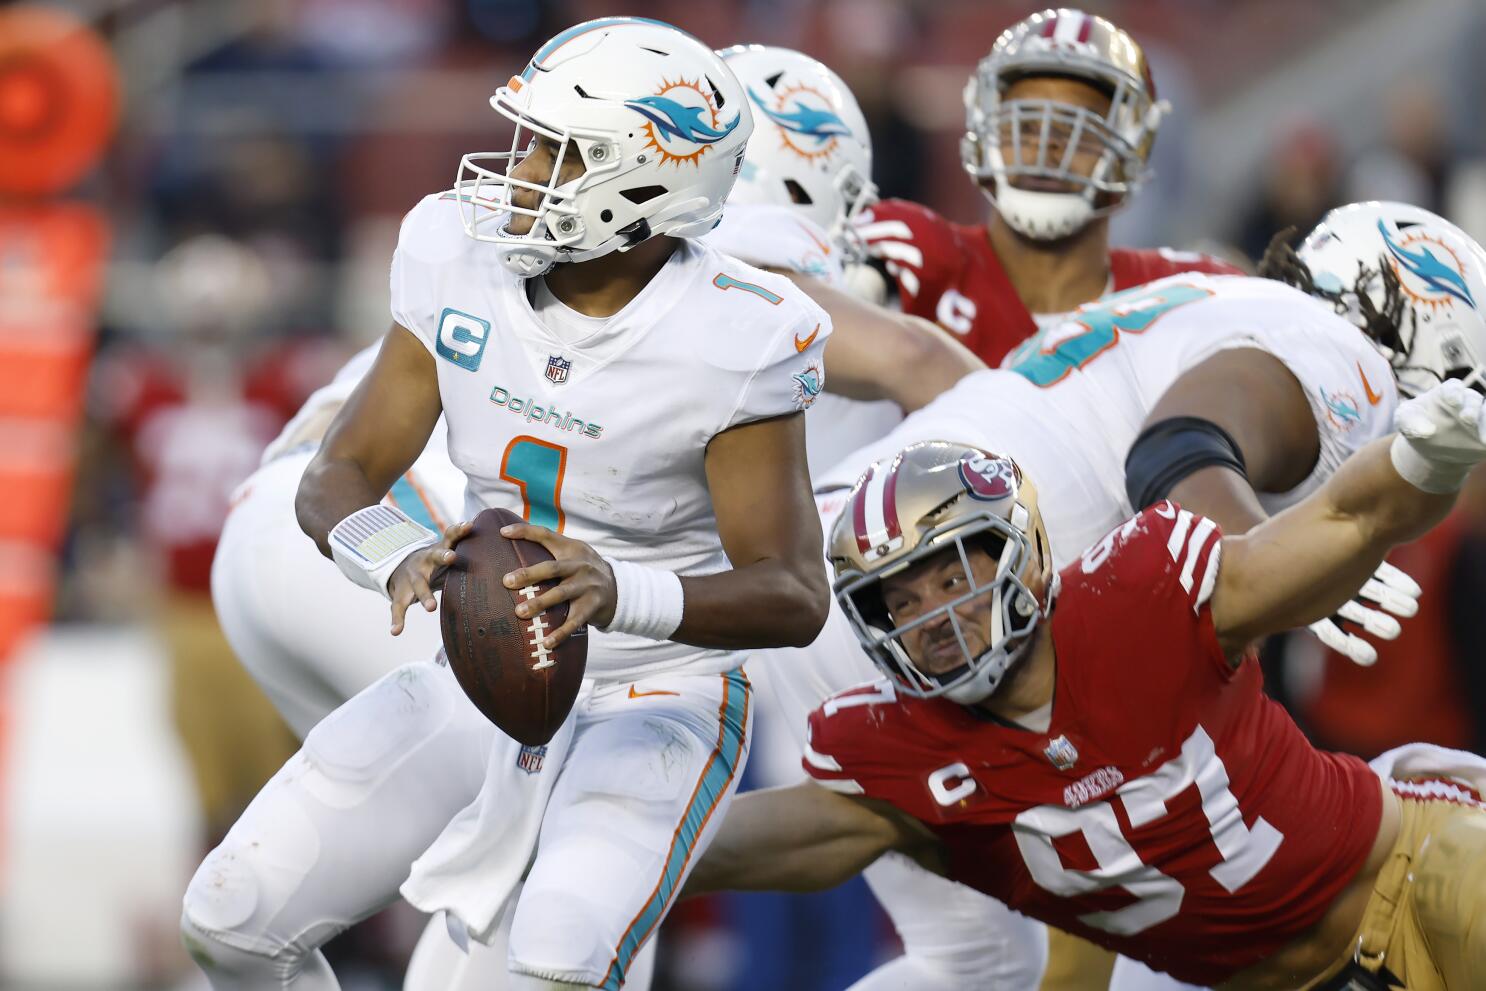 Dolphins, Chargers meet trying to bolster playoff standing - The